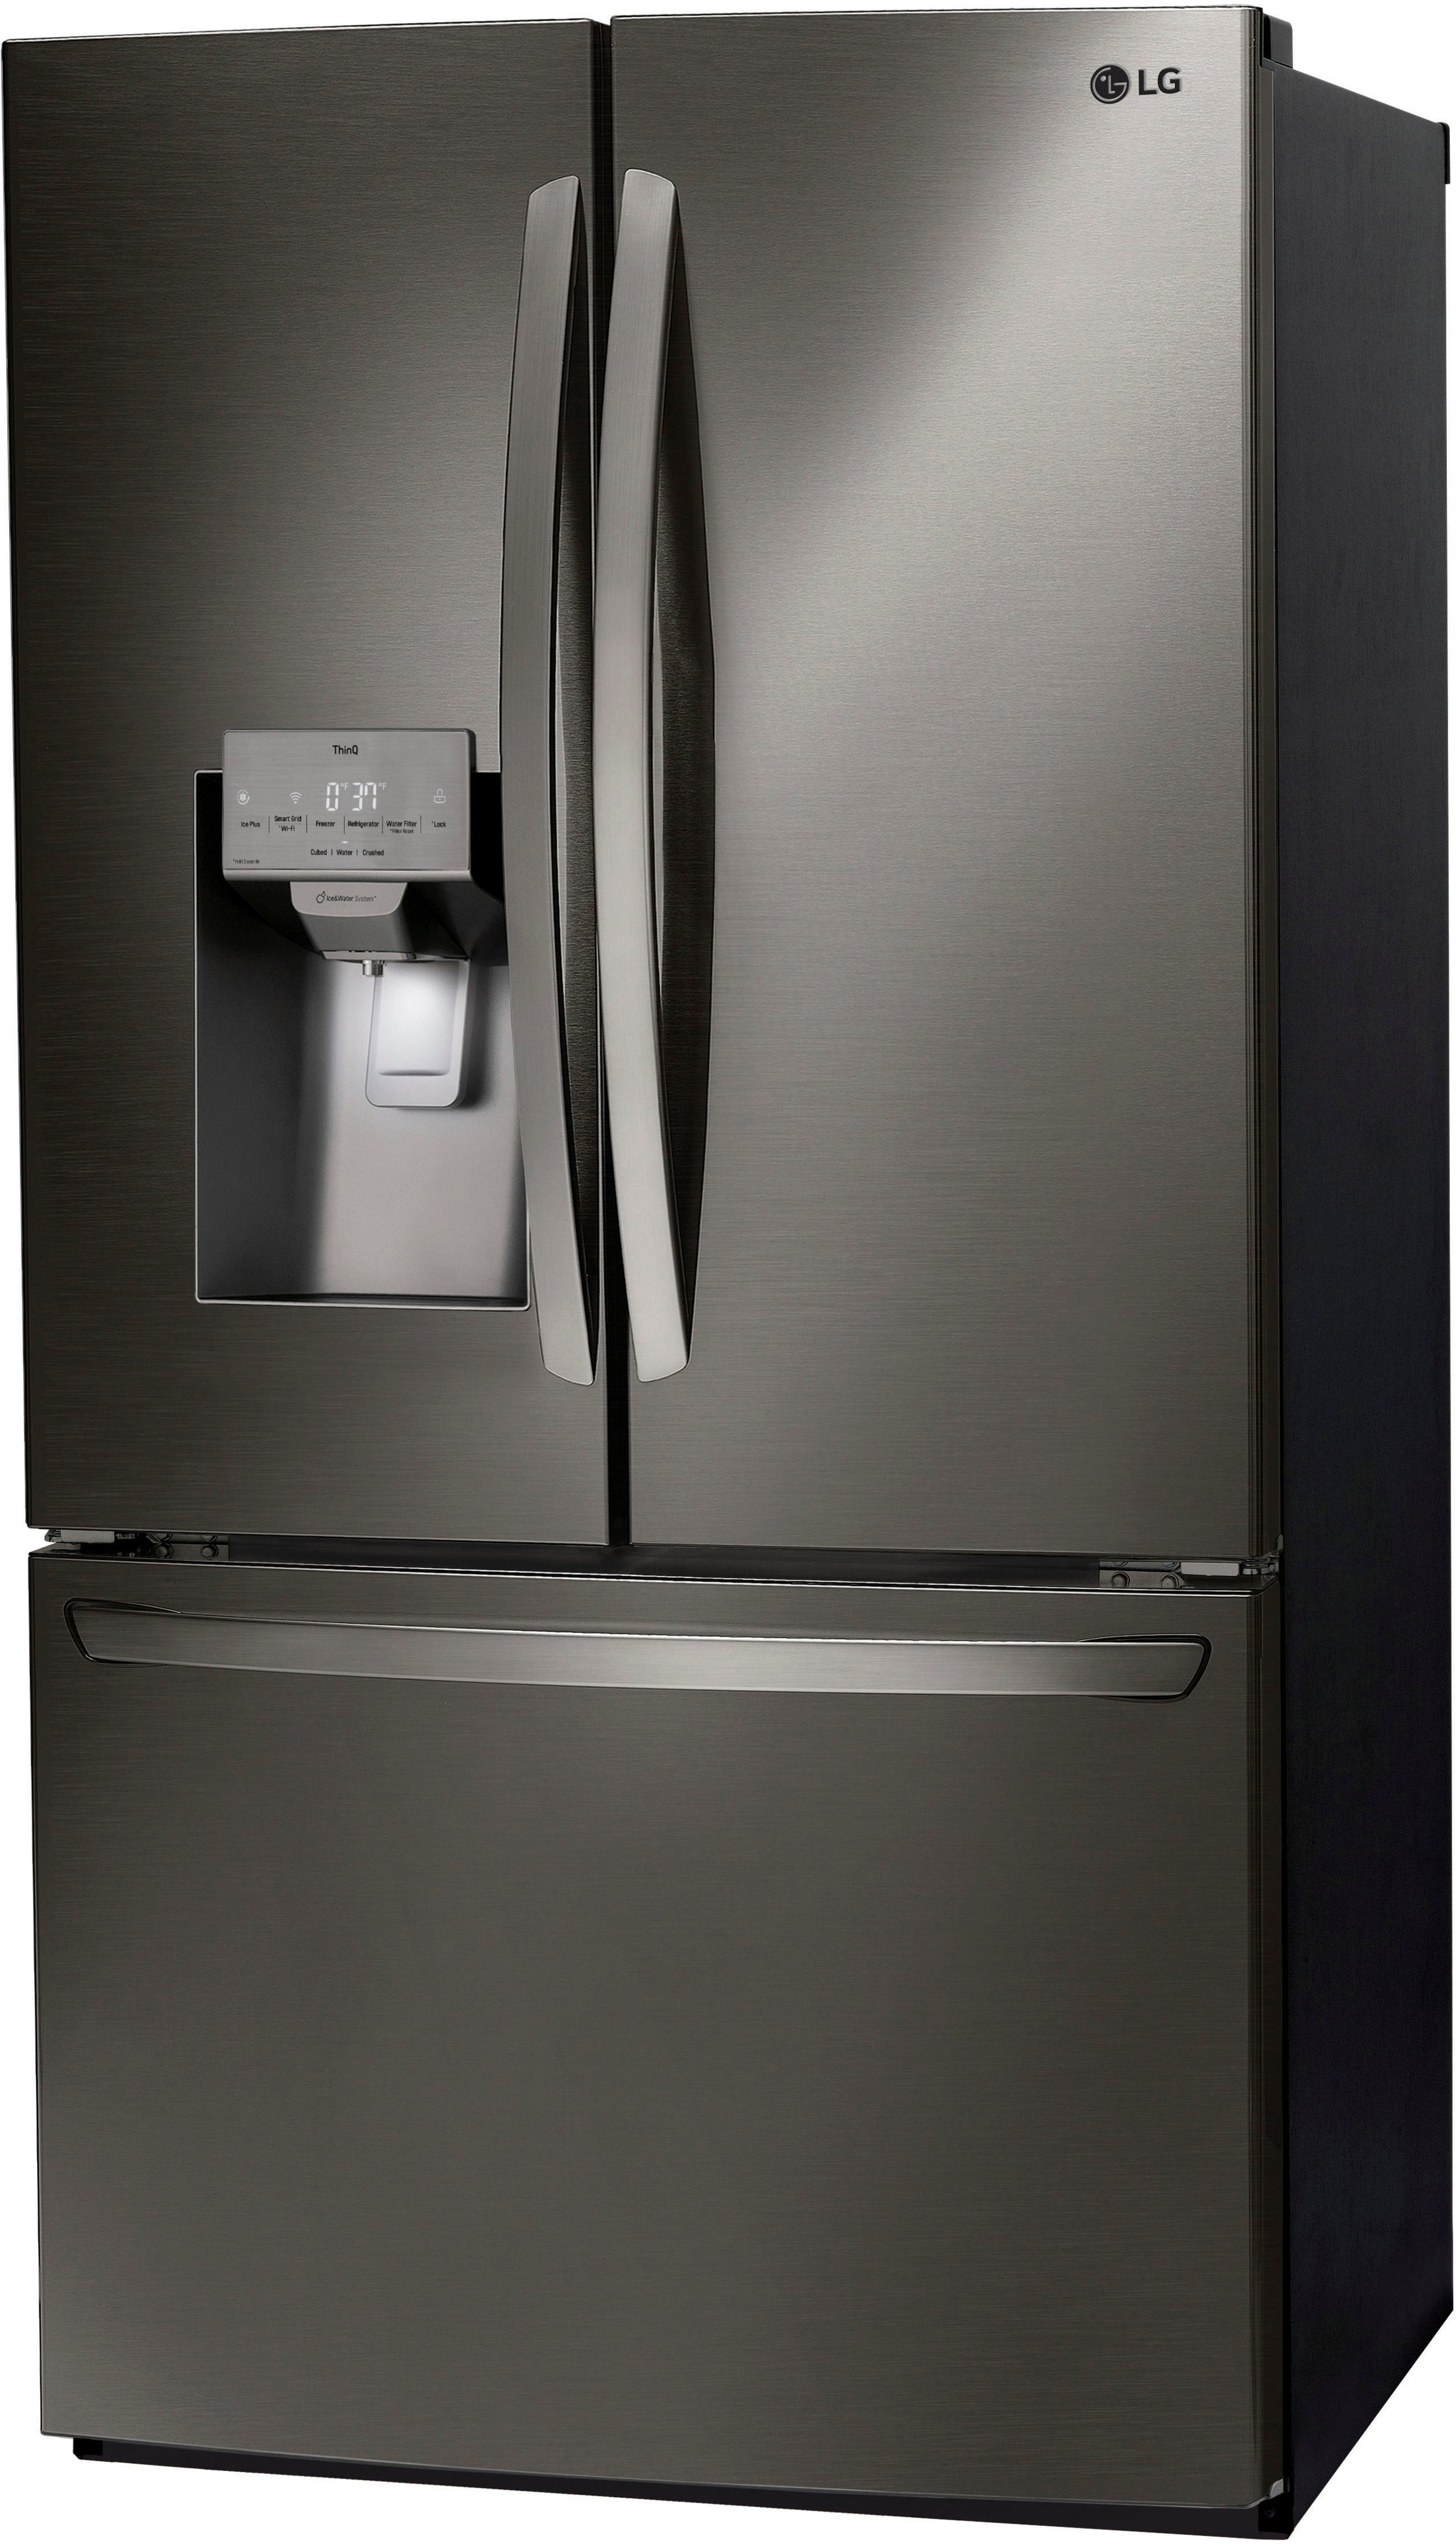 Customer Reviews: LG 27.7 Cu. Ft. French Door Smart Refrigerator with ...